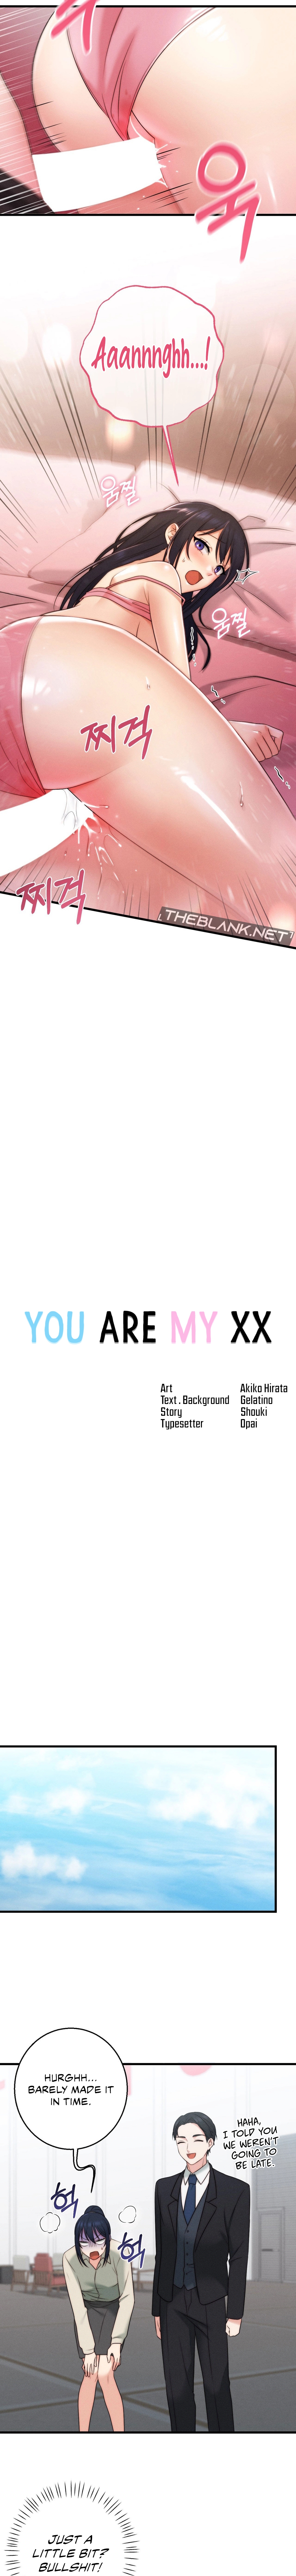 You are my XX NEW image